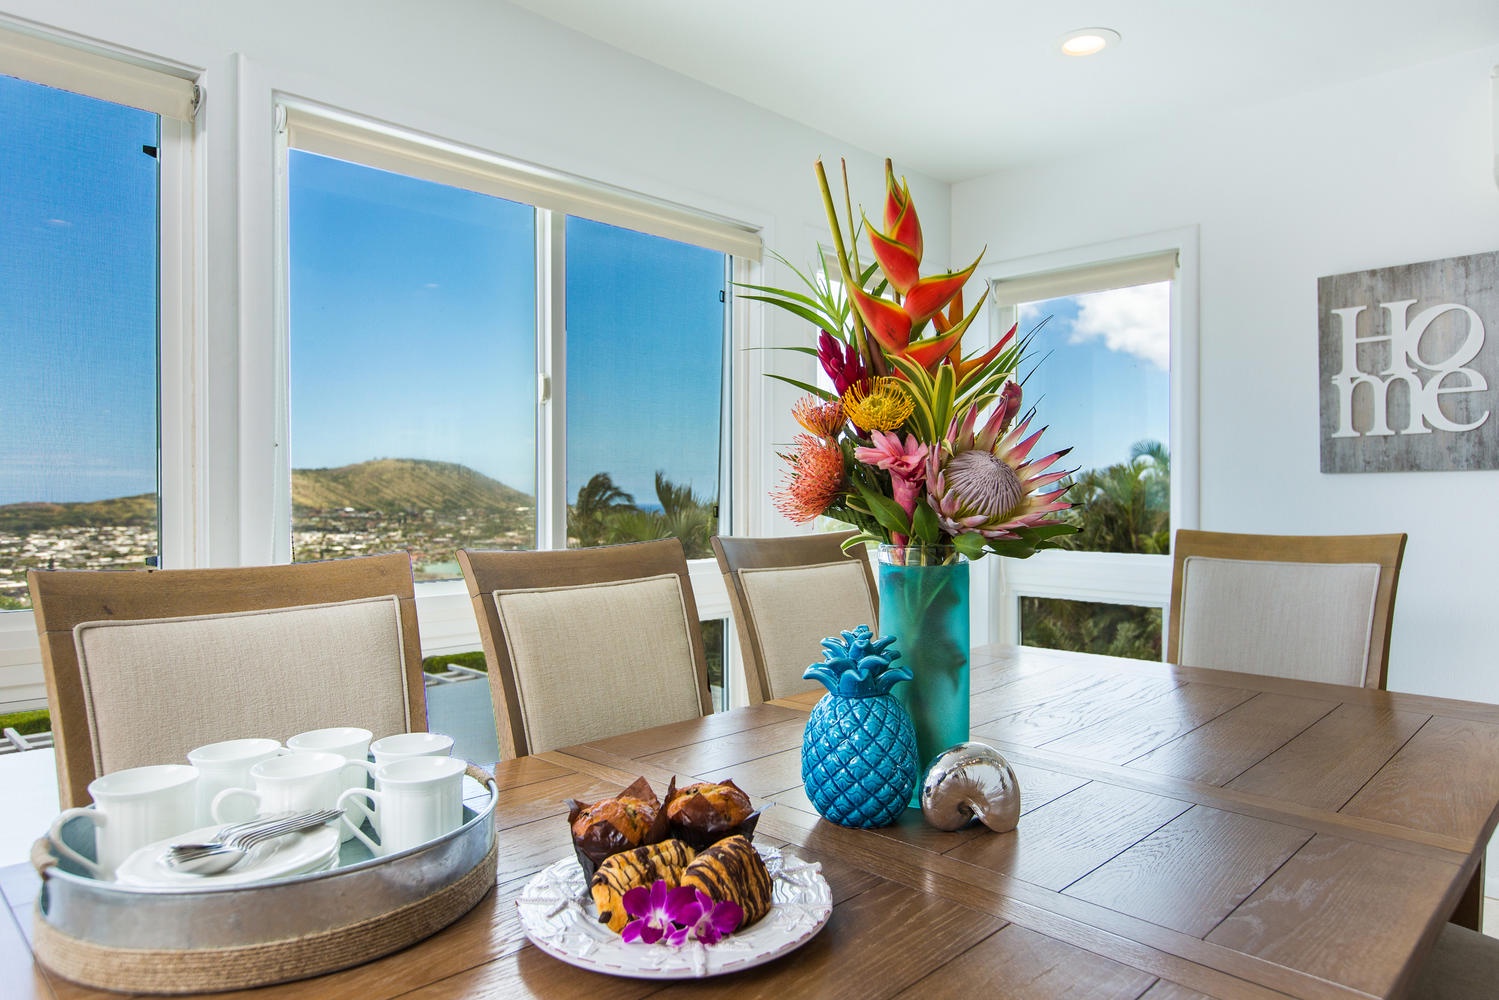 Honolulu Vacation Rentals, Makani Lani - Eat breakfast while checking out the surf overlooking Koko Crater, Koko Marina, and the deep blue ocean.